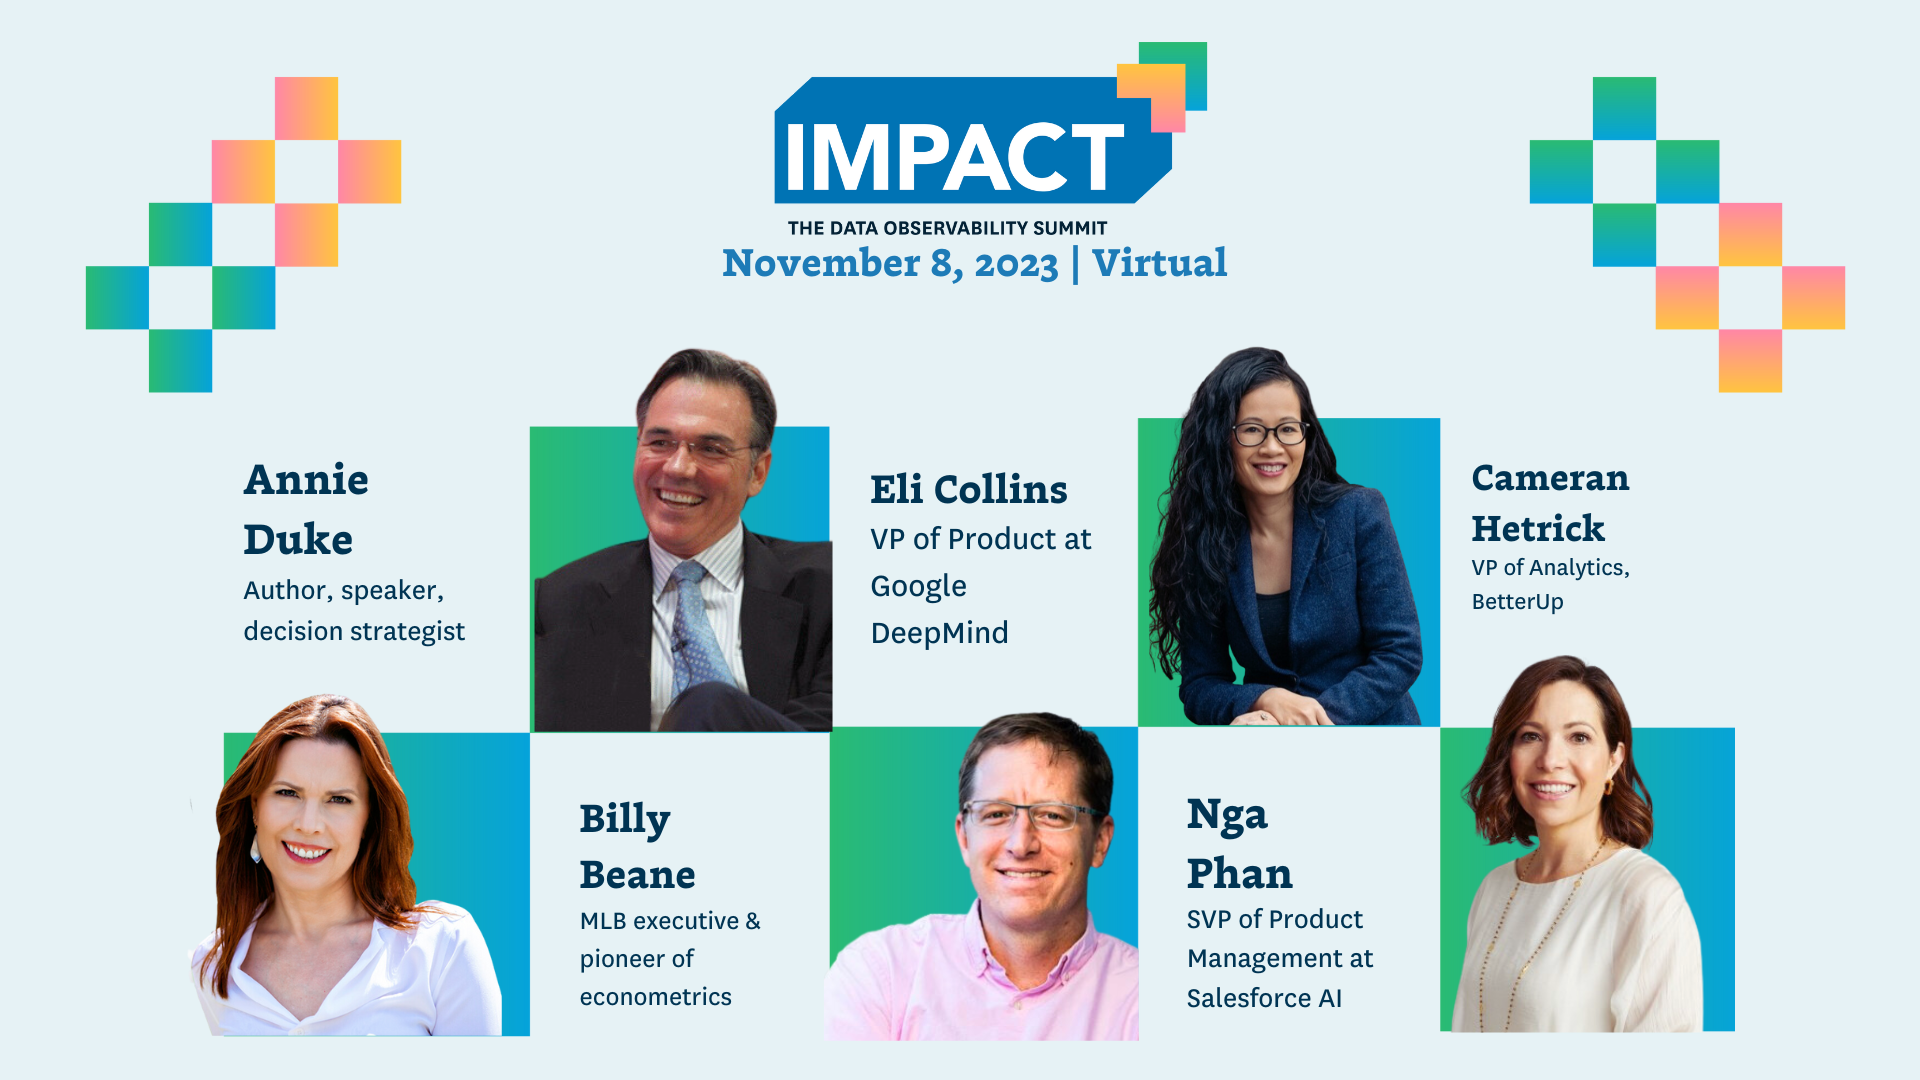 Billy Beane, Generative AI, and Data Observability: 5 Reasons Why I’m Excited About IMPACT 2023 – And You Should Be, Too